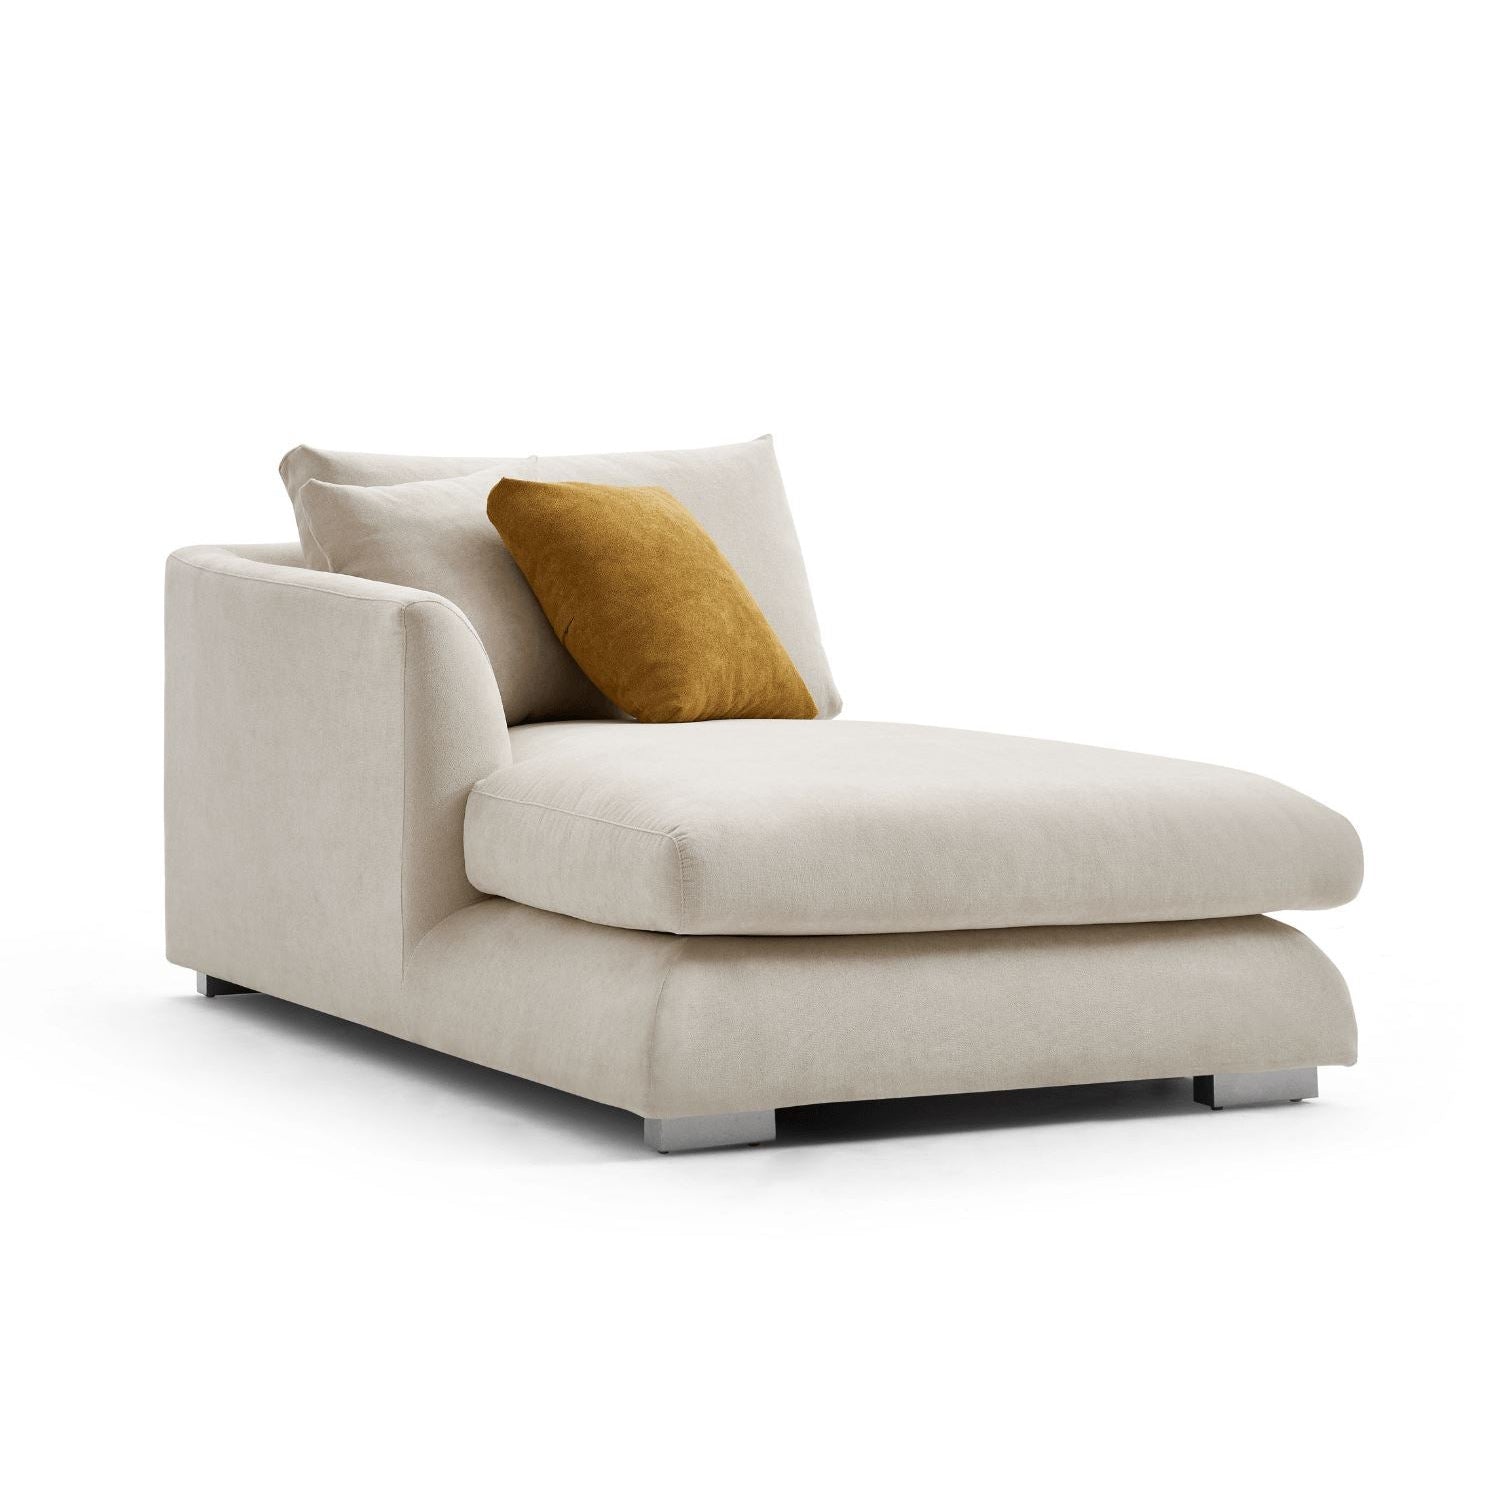 Feathers - Chaise